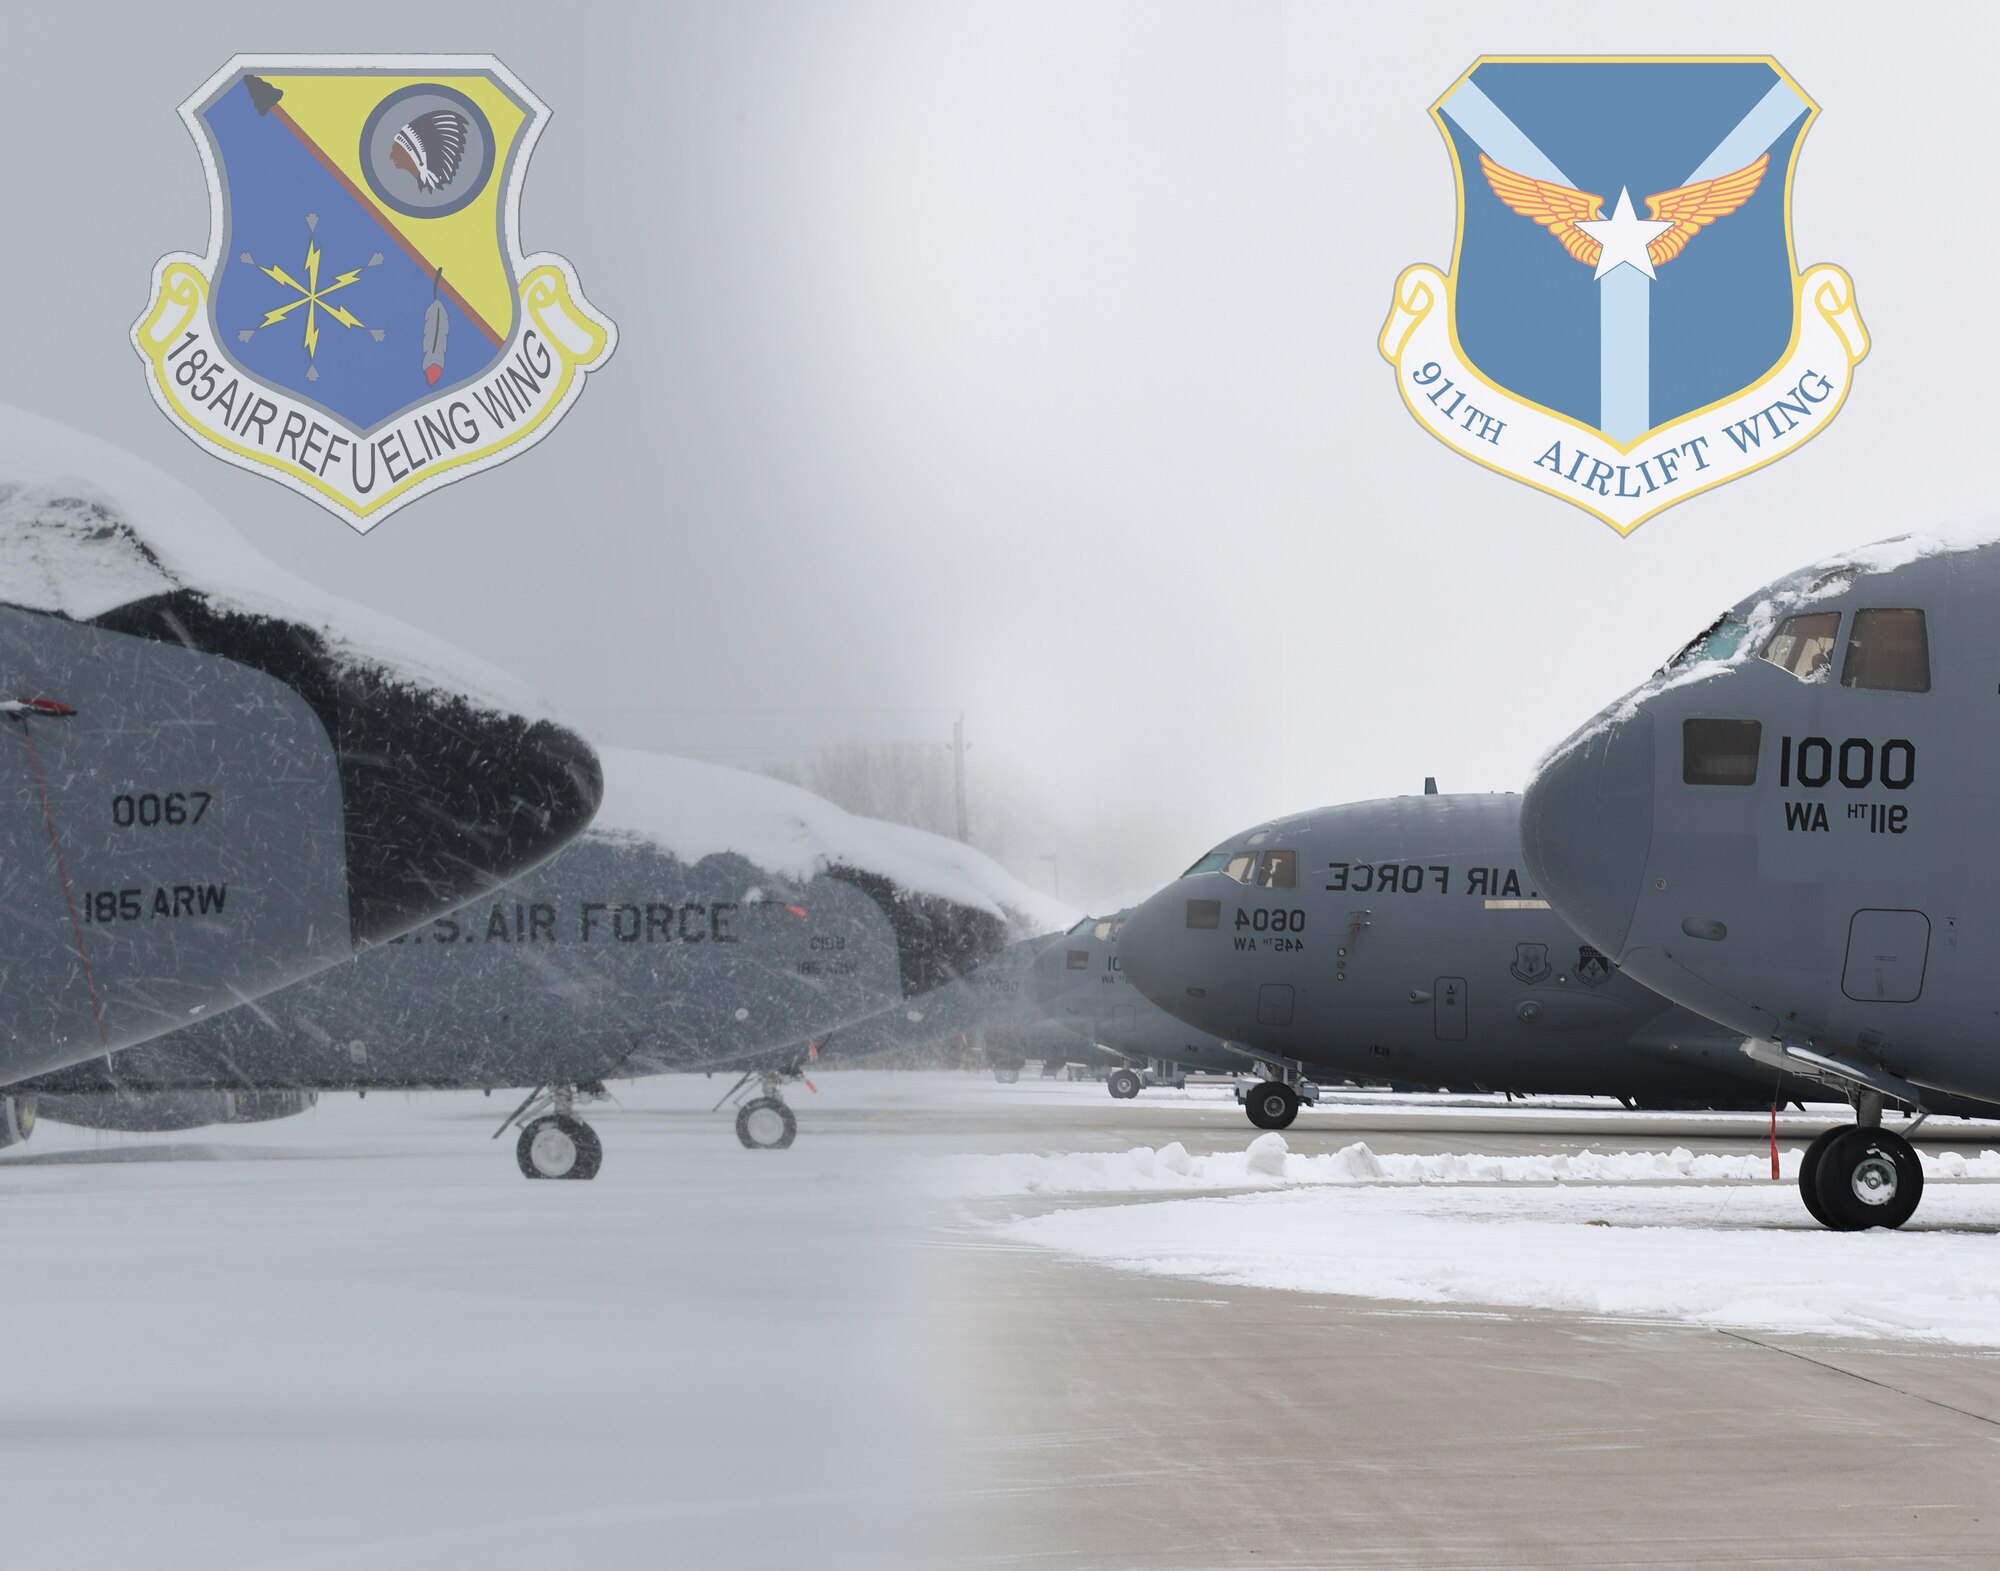 KC-135 aircraft from the 185th Air Refueling Wing and C-17 aircraft from the 911th Airlift Wing sit on their respective flightlines during winter storms. The two units have been working together for a couple of months while members from both units forge new ties and train together on air refueling missions. (U.S. Air Force photo illustration by Joshua J. Seybert)